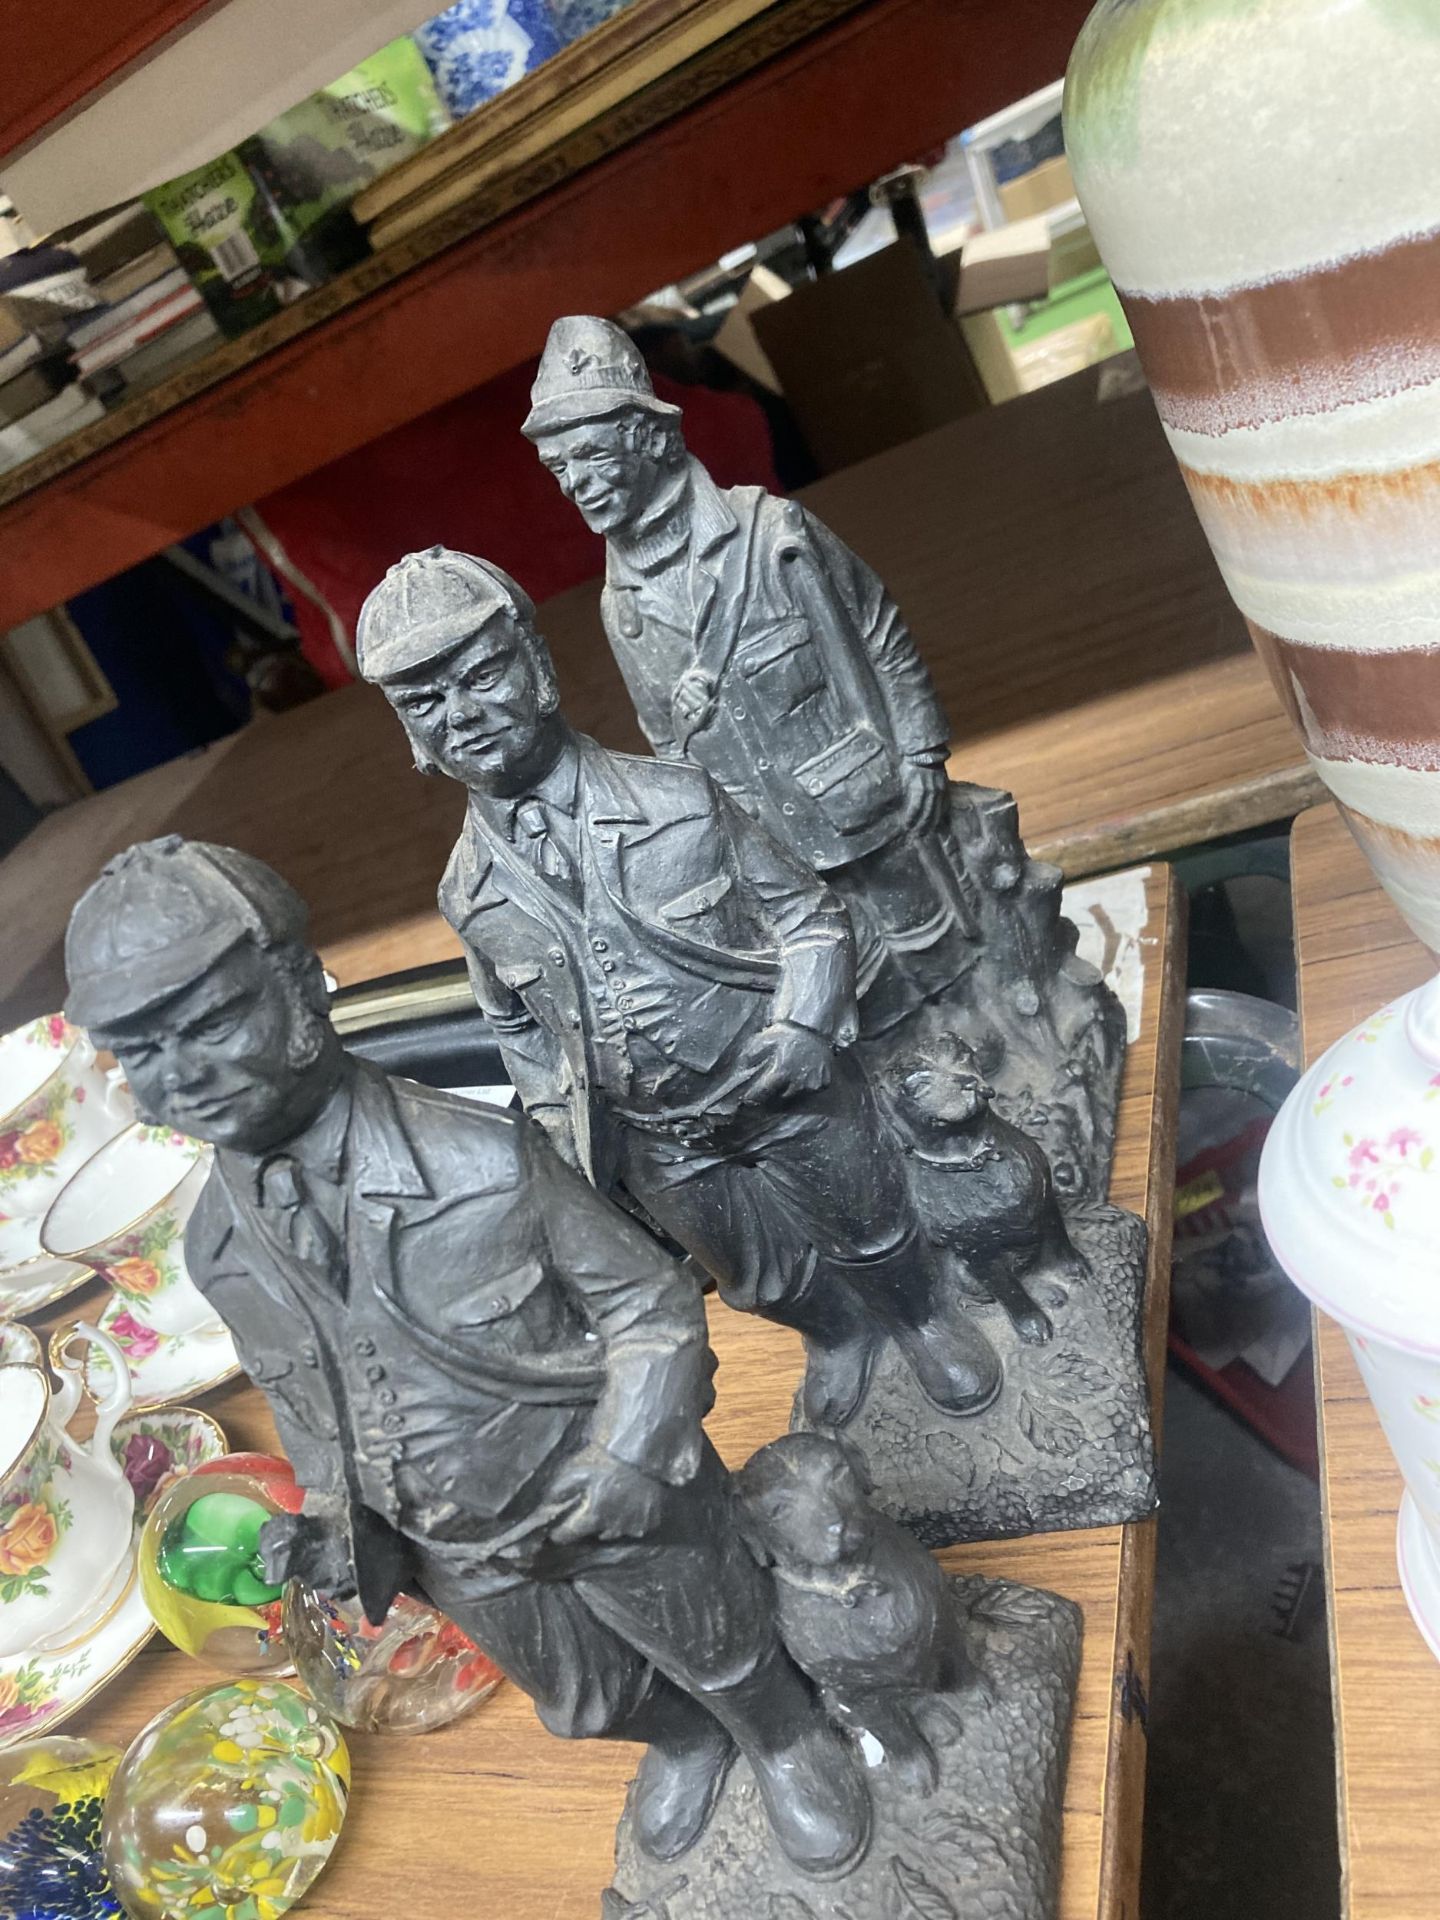 THREE PLASTER COAL GAMEKEEPER FIGURES TOGETHER WITH DOG FIGURE AND DUCKS - Image 3 of 3